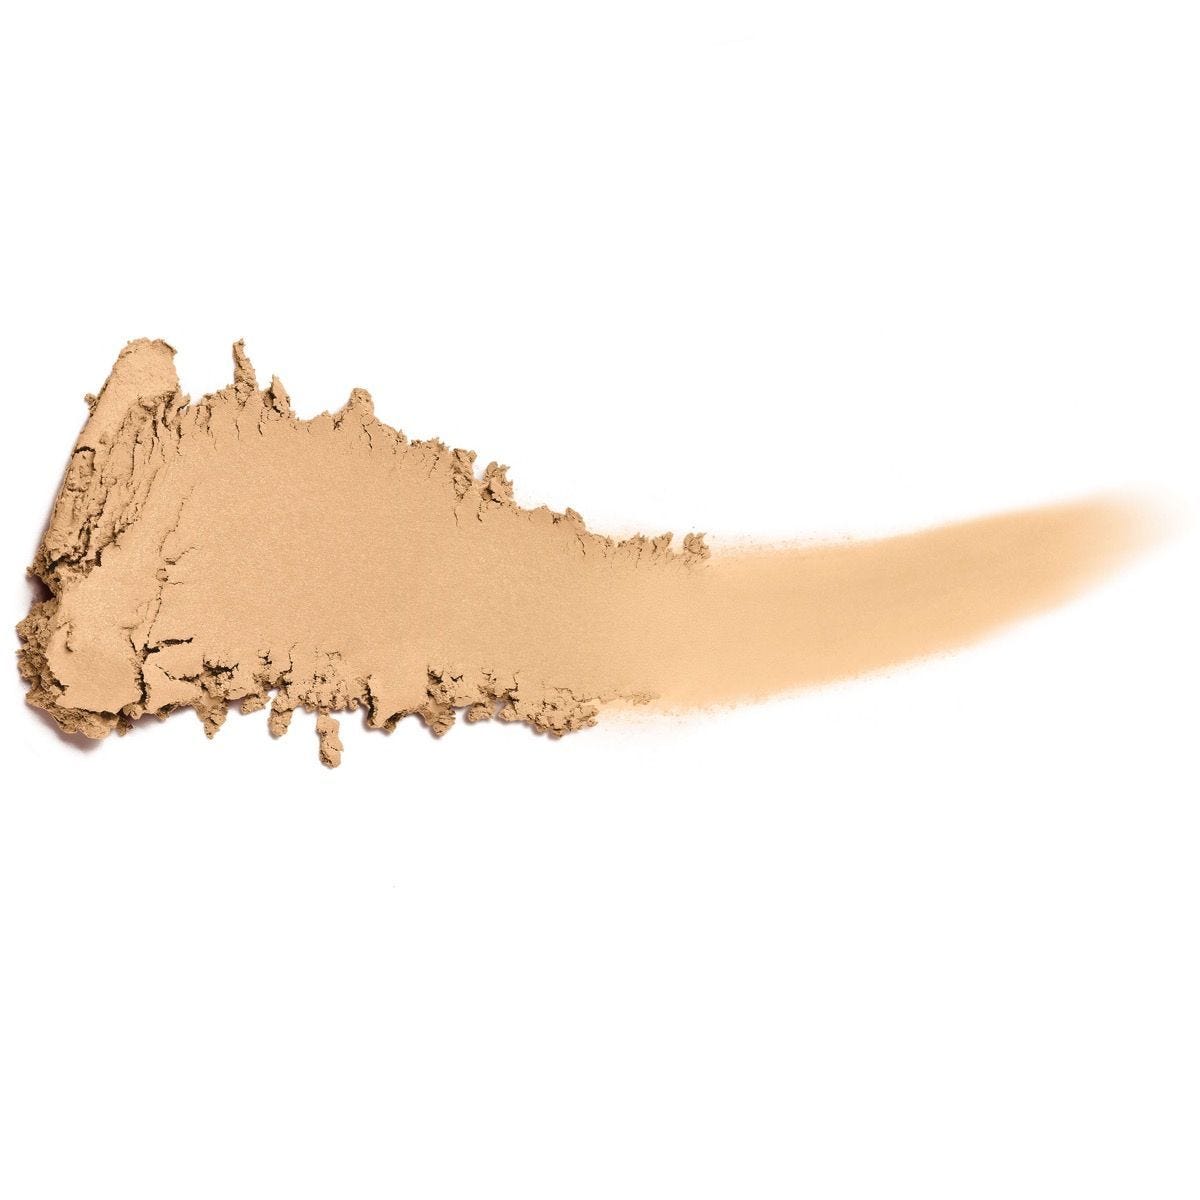 Flawless Finish Everyday Perfection Bouncy Foundation